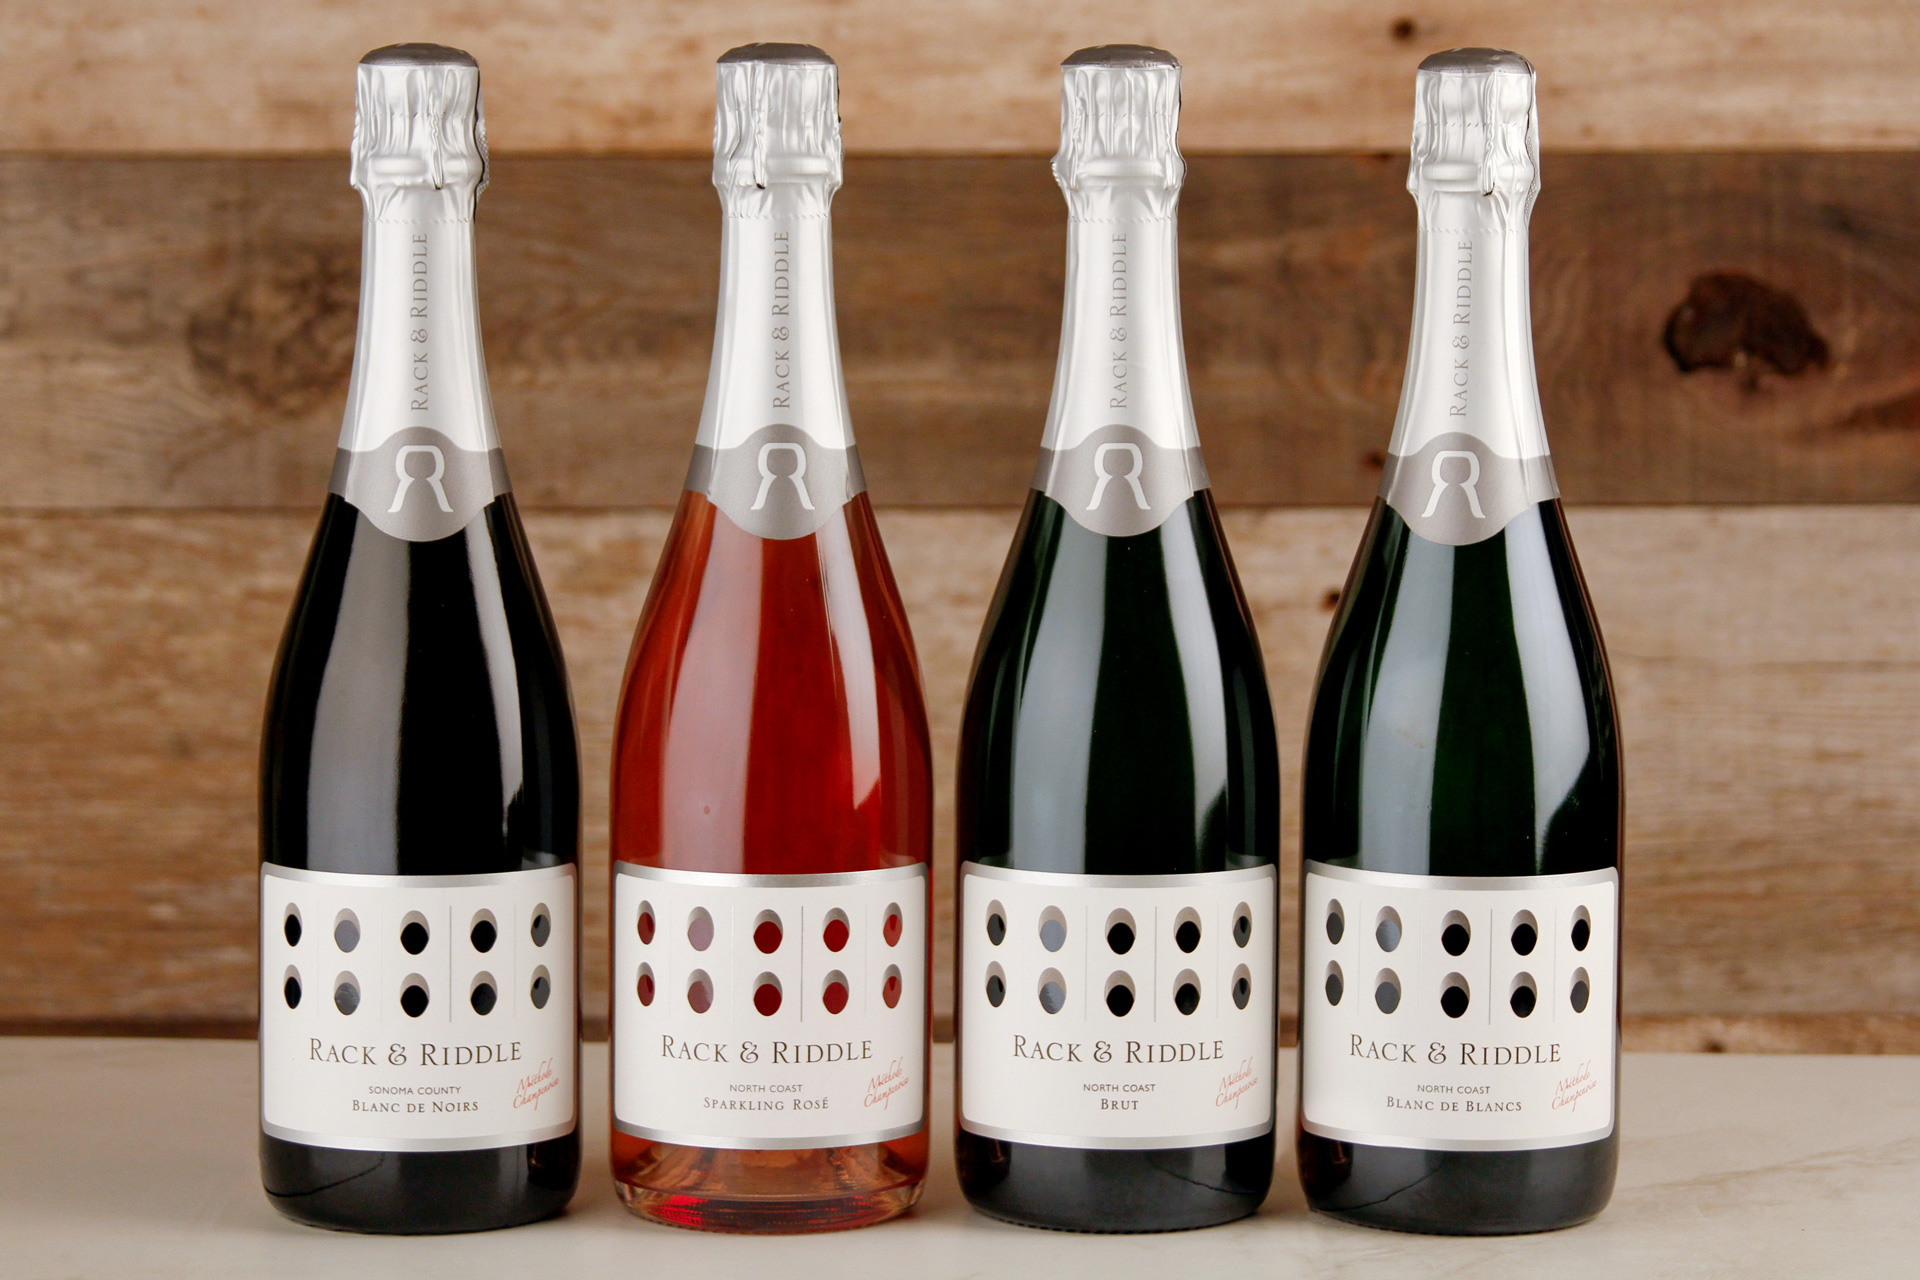 Rack & Riddle's Four-Pack of sparkling wines.